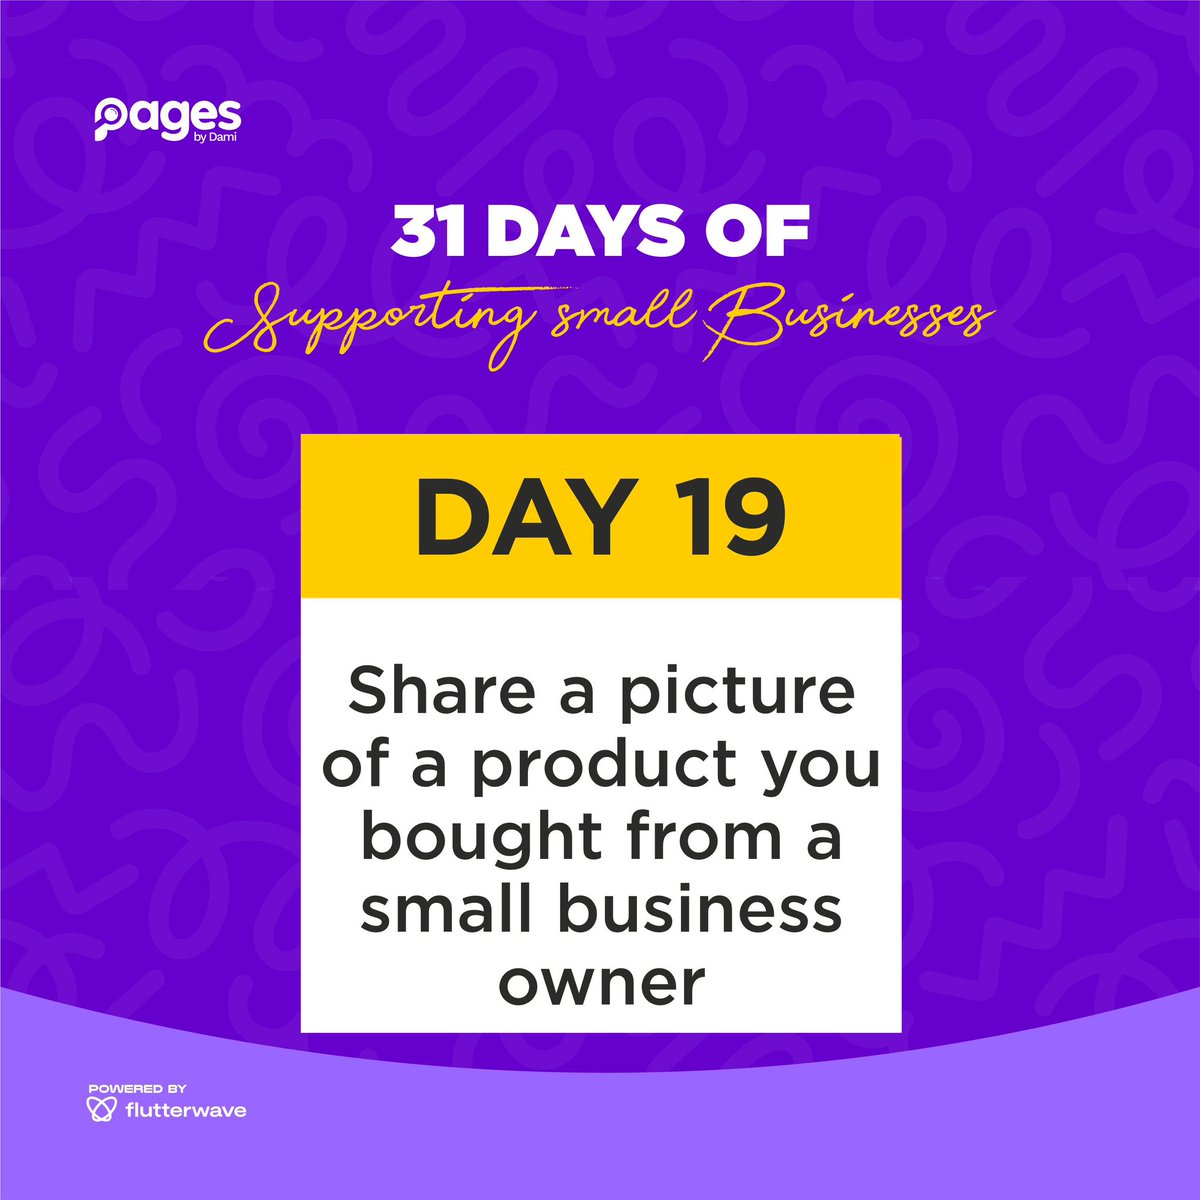 It’s Day 19 of supporting a small business. Support a small business by sharing a product picture you bought from them 🥹🥹🥹